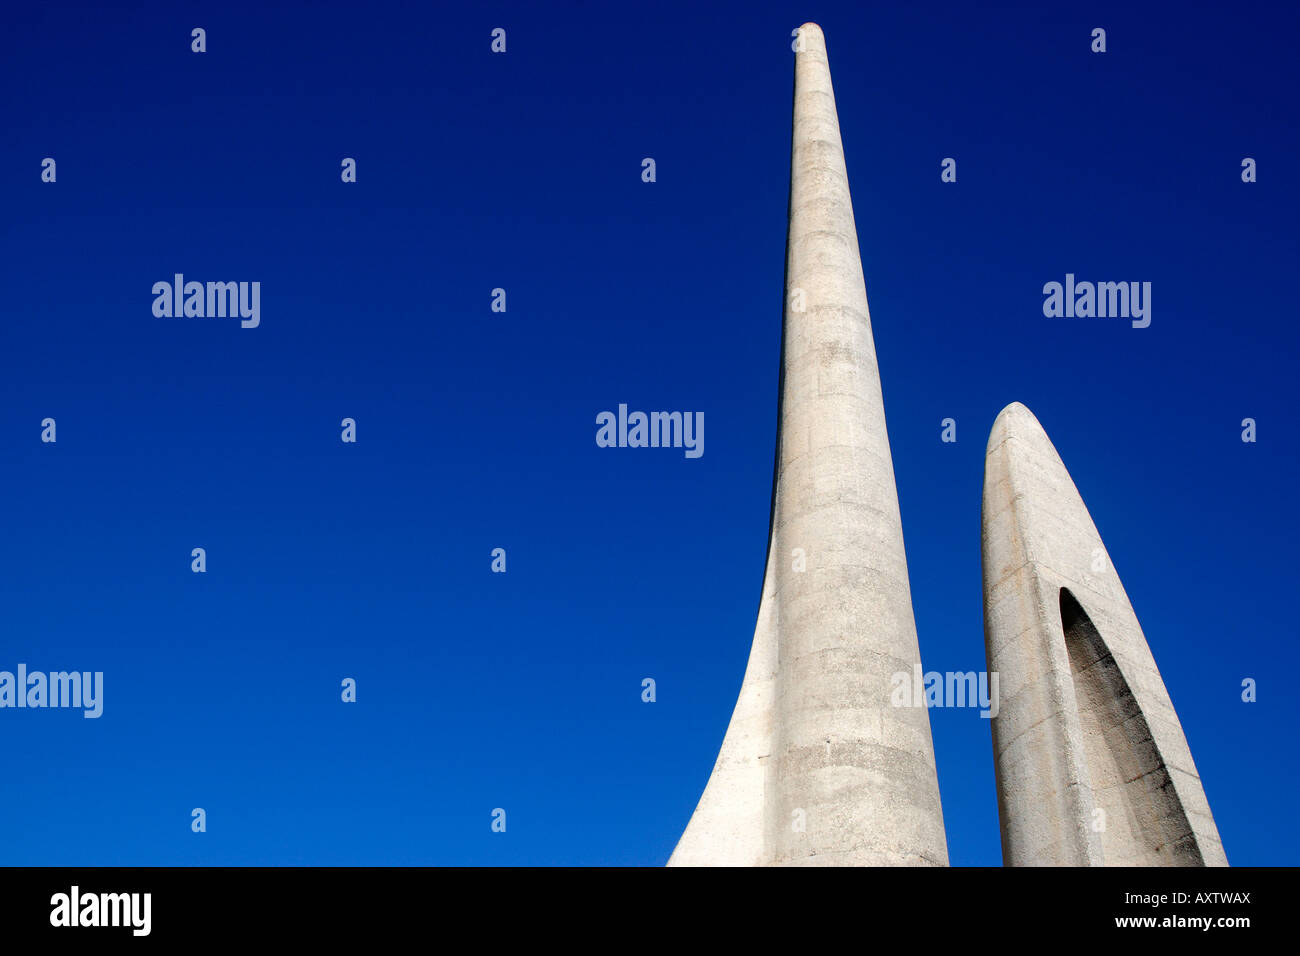 afrikaans language monument paarl western cape province south africa Stock Photo